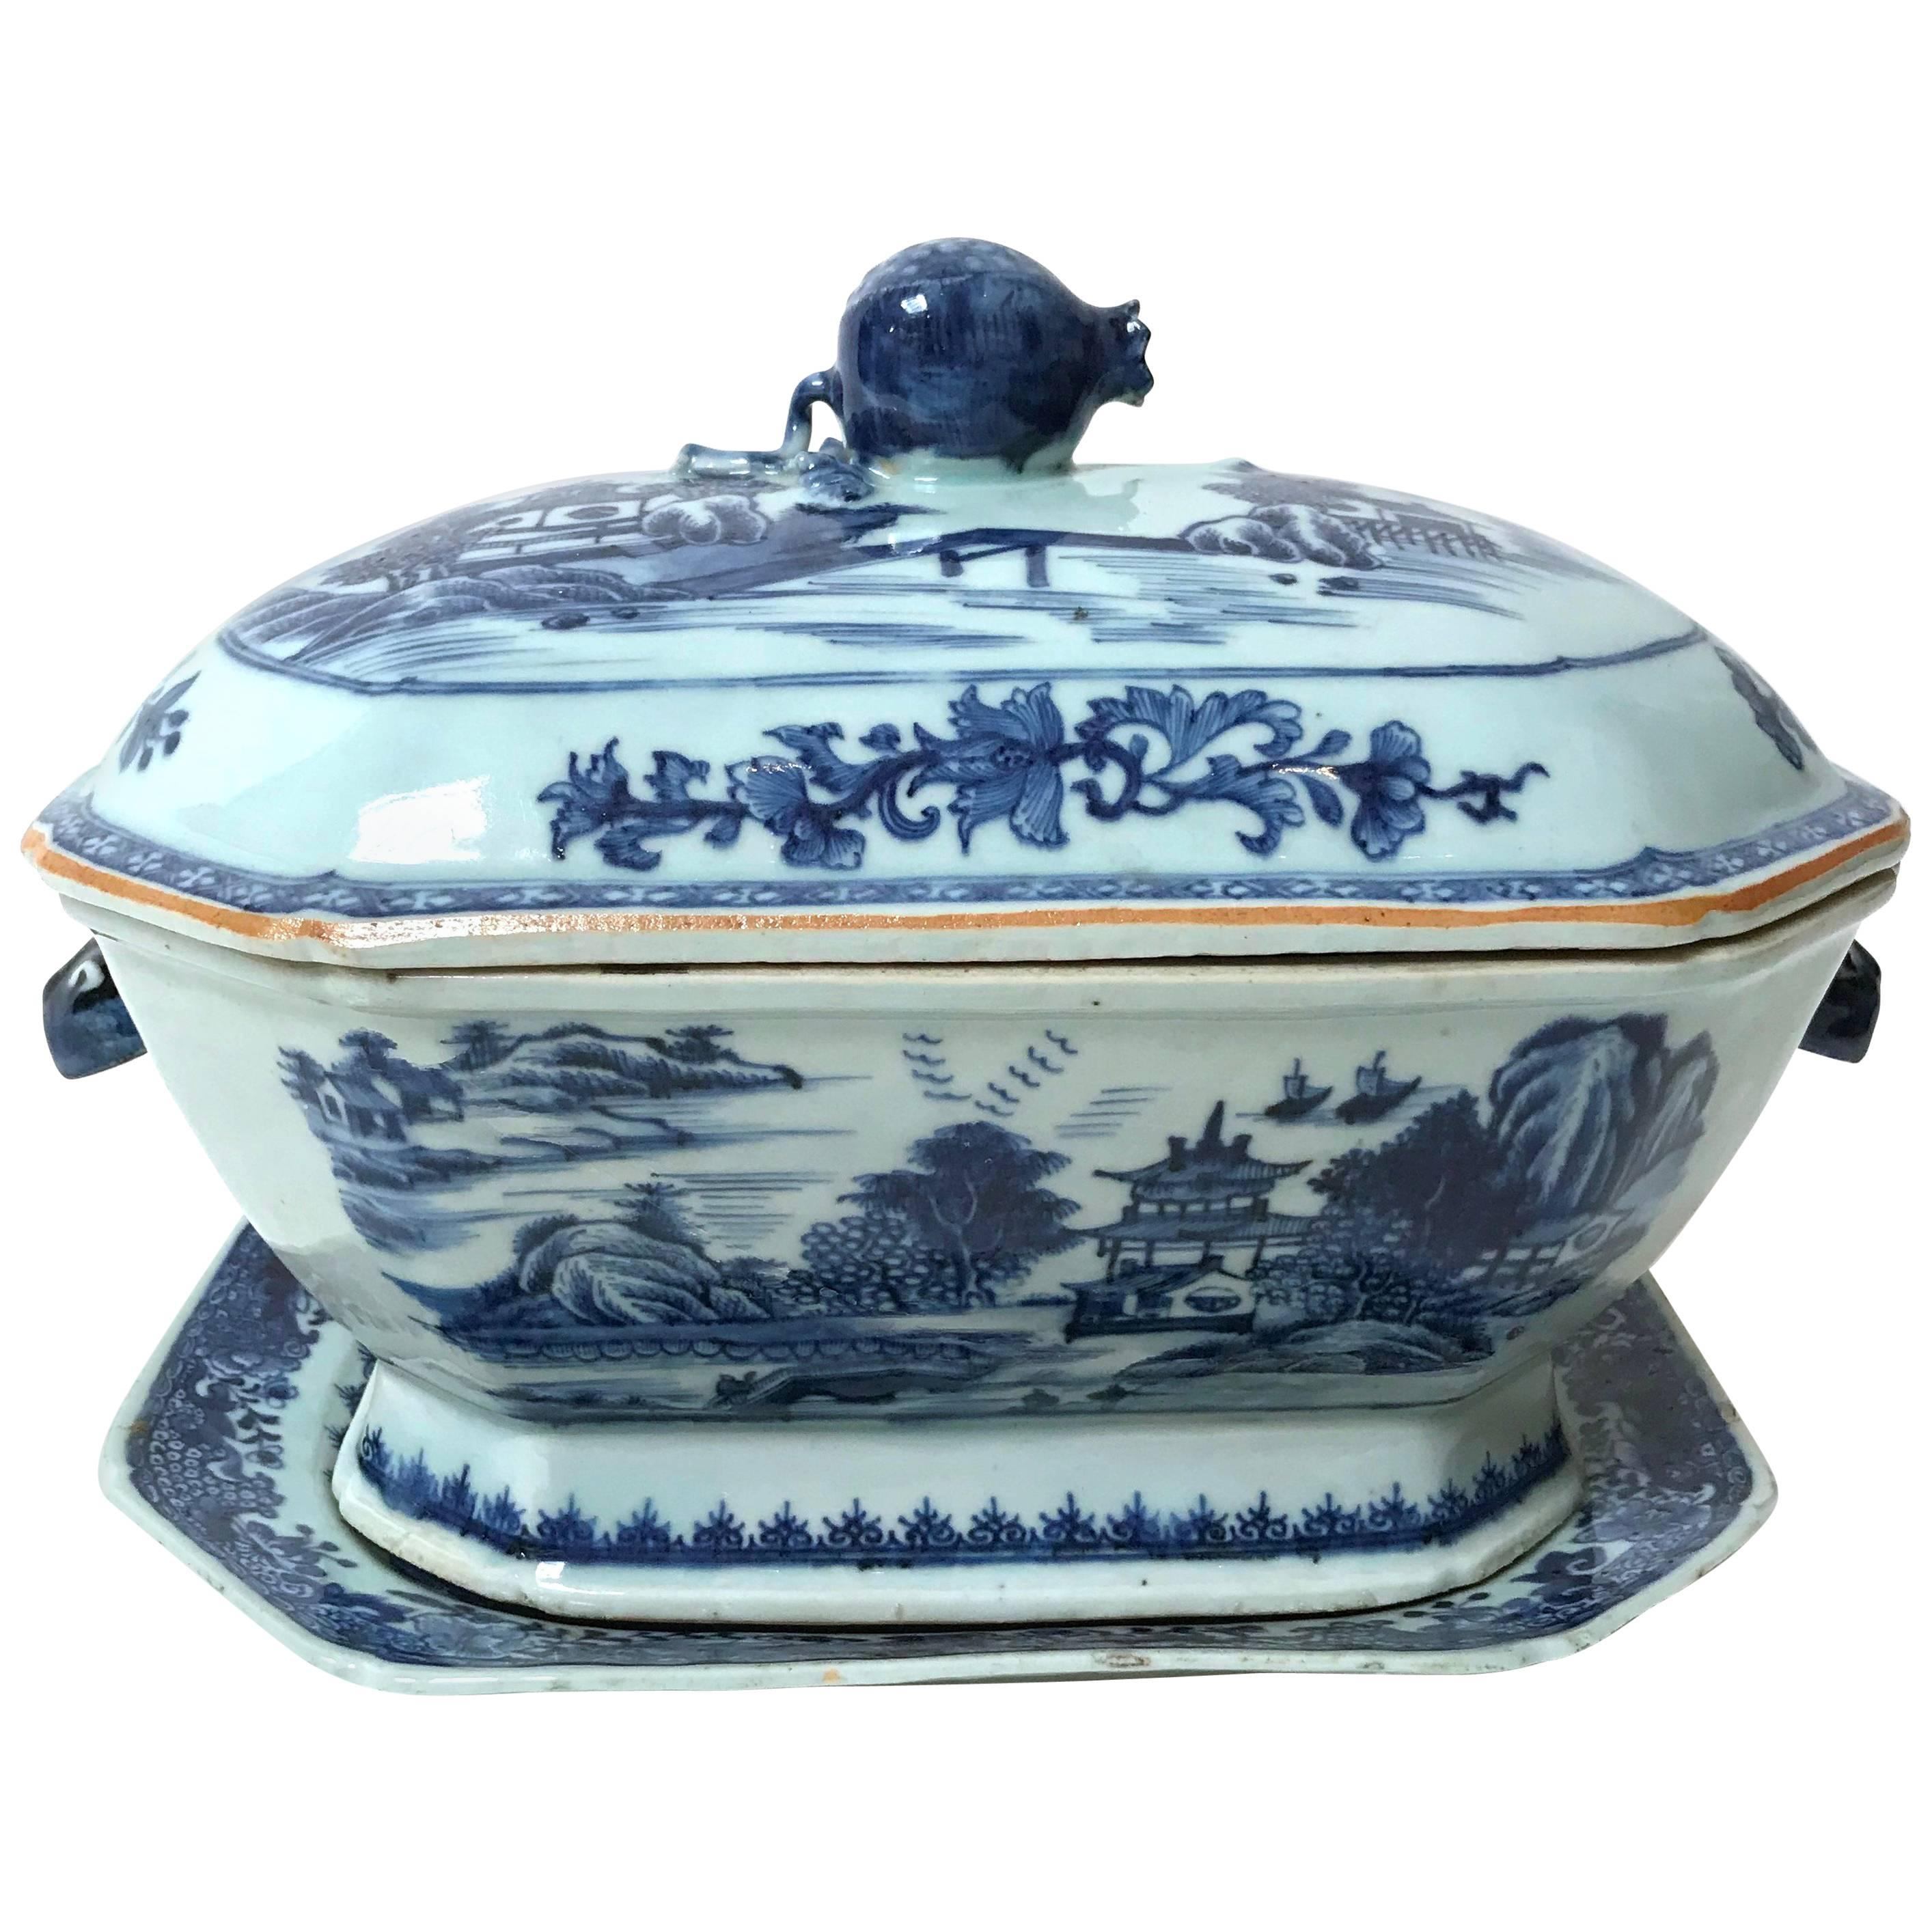 Chinese Export Blue and White Tureen and Underplate, circa 1790